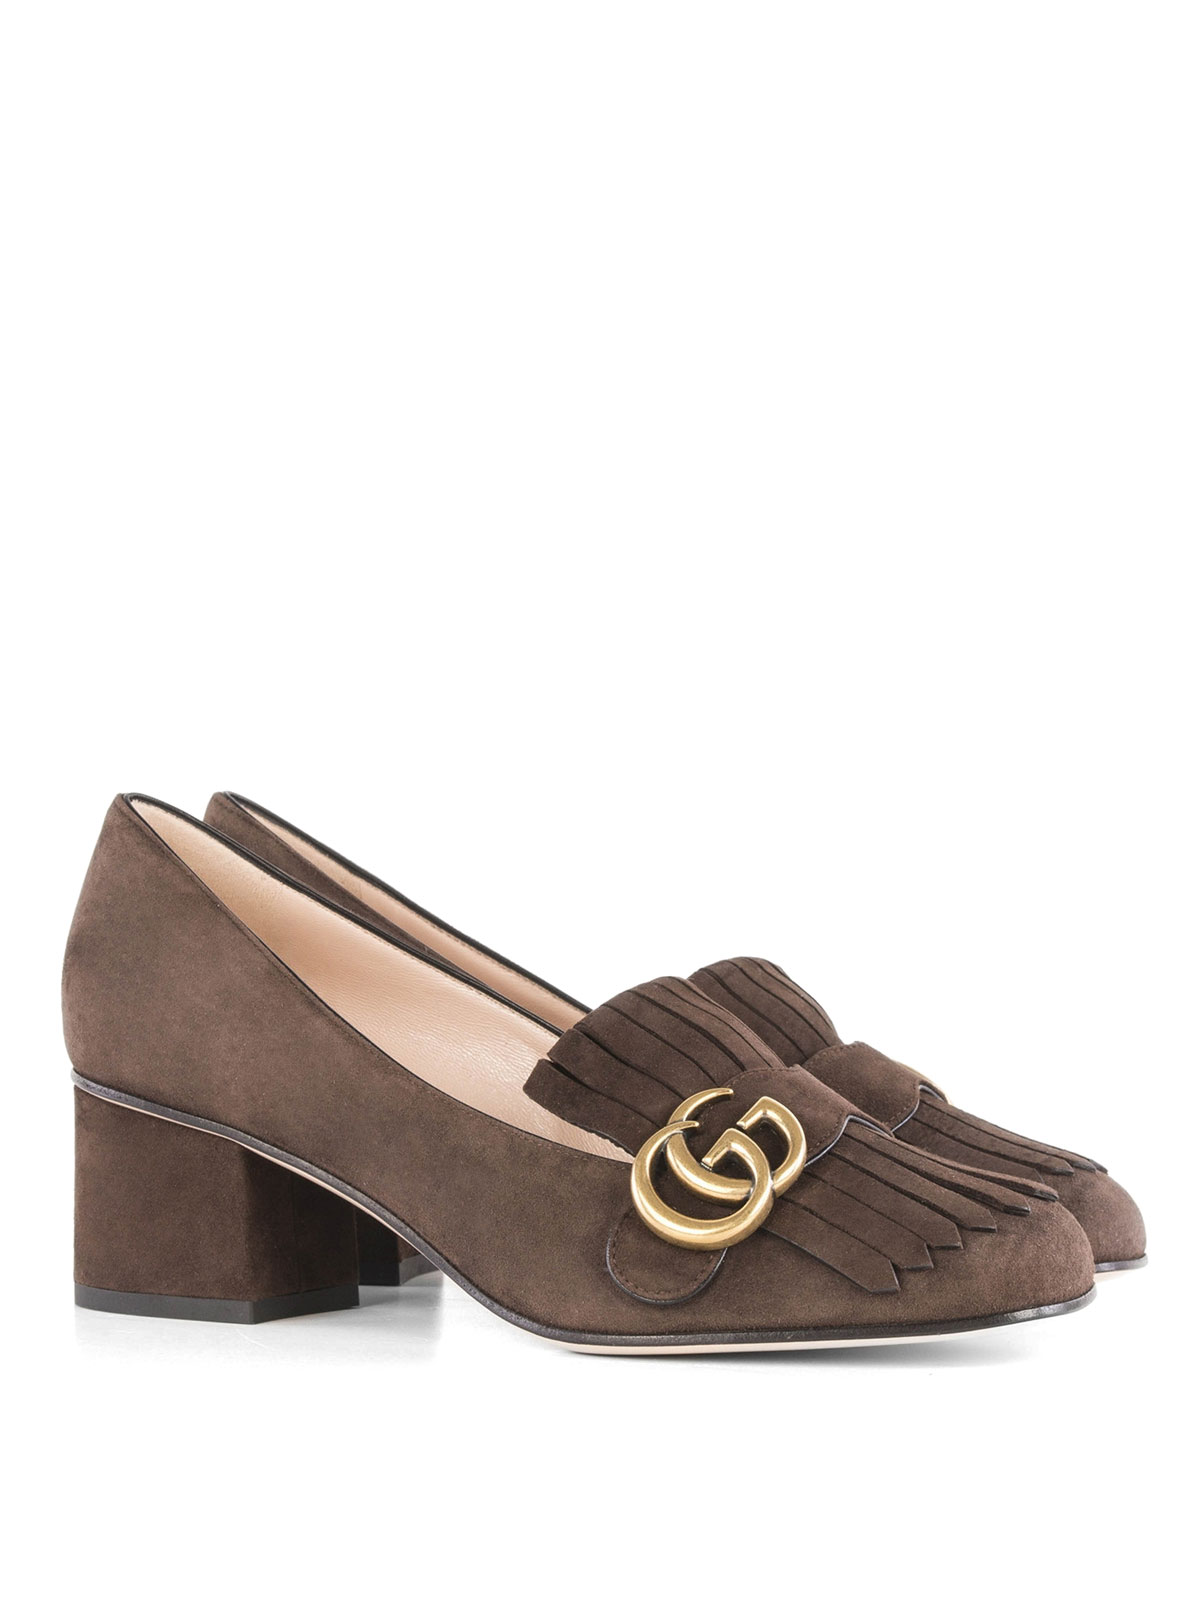 Double G detailed suede court shoes 